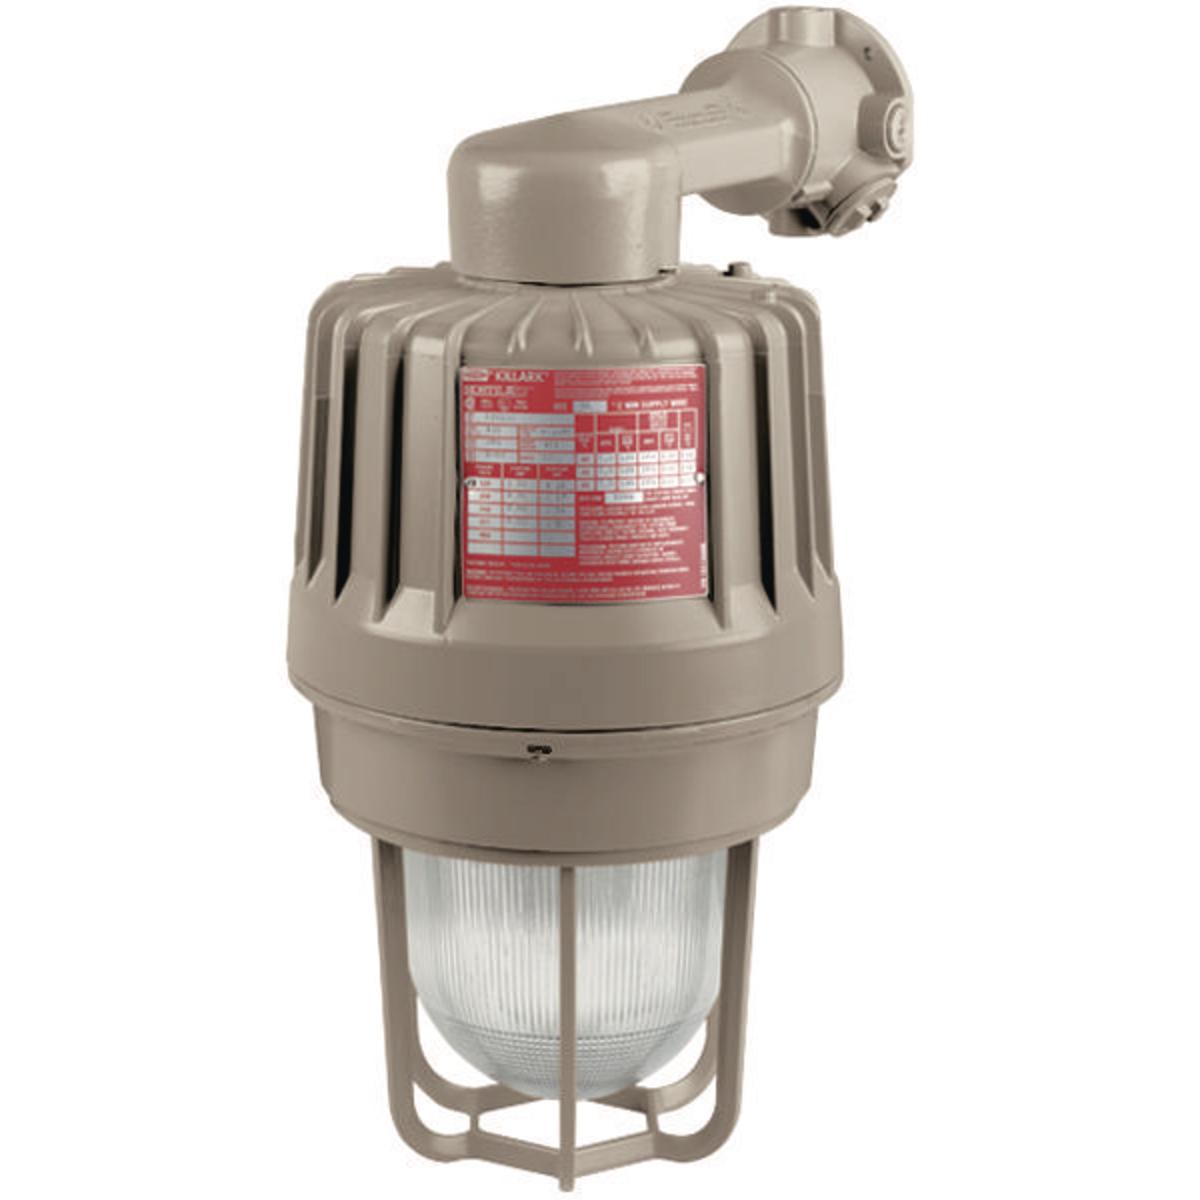 Hubbell EZP258B2G 250W Quadri-Volt Pulse-Start Metal Halide 50Hz Wall Mount with Guard  ; Three light sources – High Pressure Sodium (50-400W), Metal Halide (70-400W) and Pulse Start Metal Halide (175-400W) ; Mounting choice –Pendant, ceiling, 25˚ stanchion or 90˚ wall mou